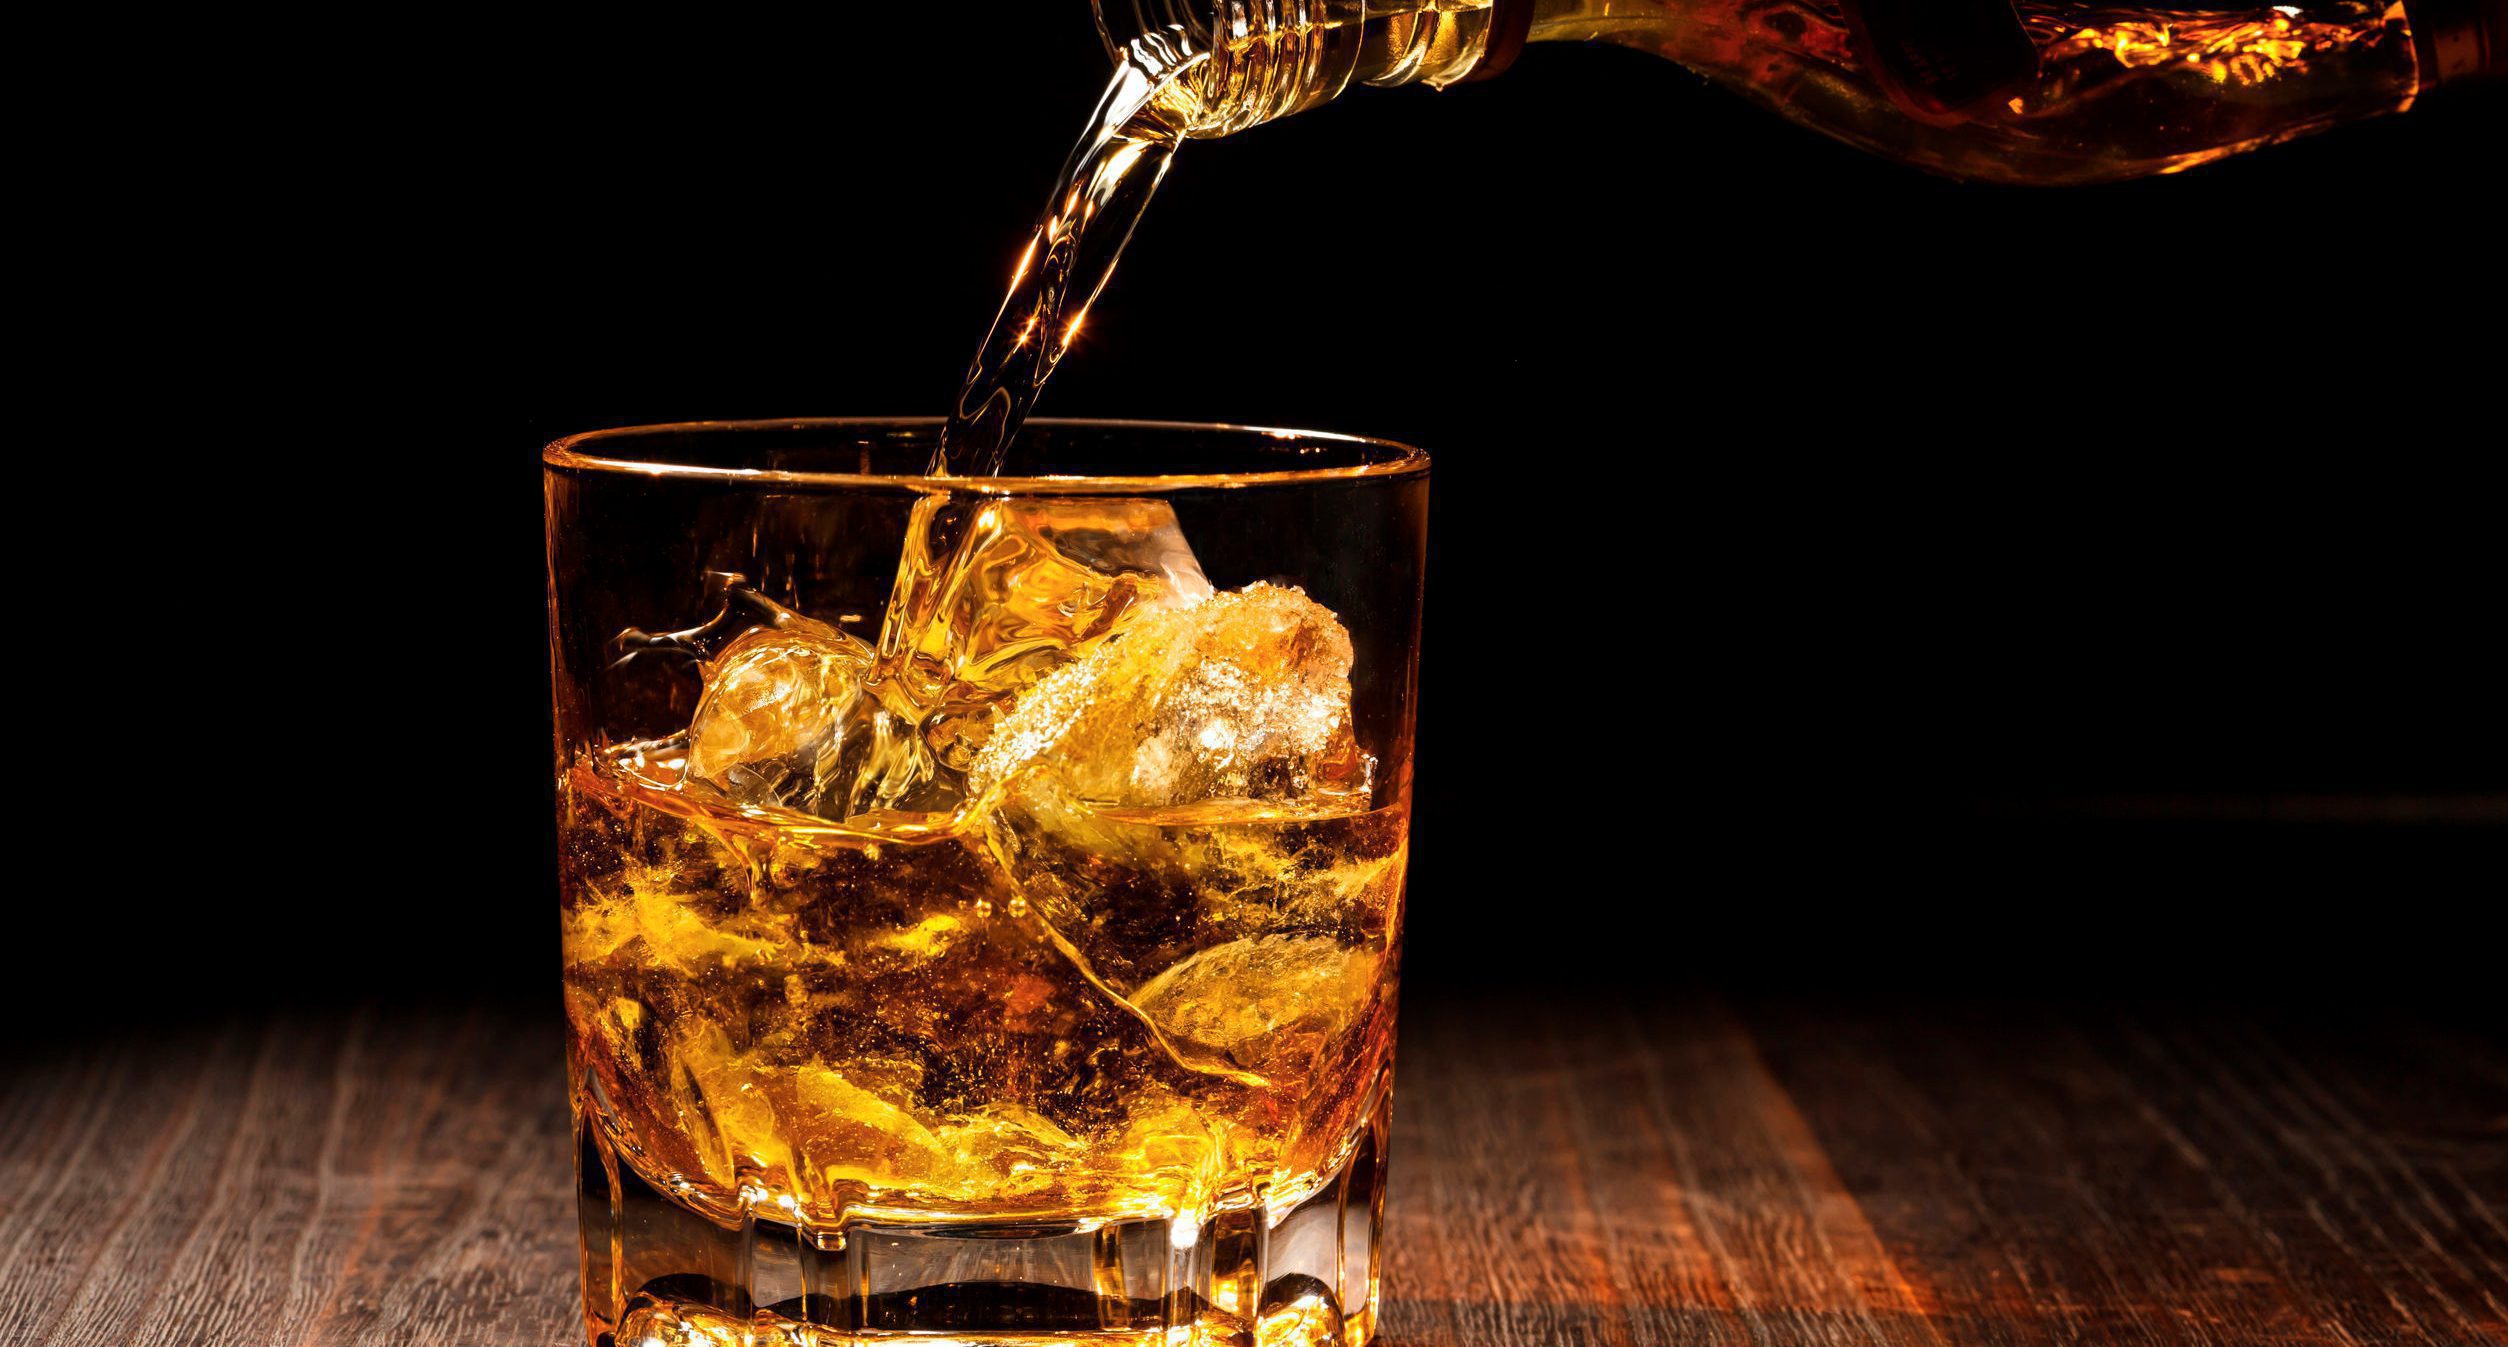 Should you ever put ice in a single malt scotch?, Gentleman's Journal